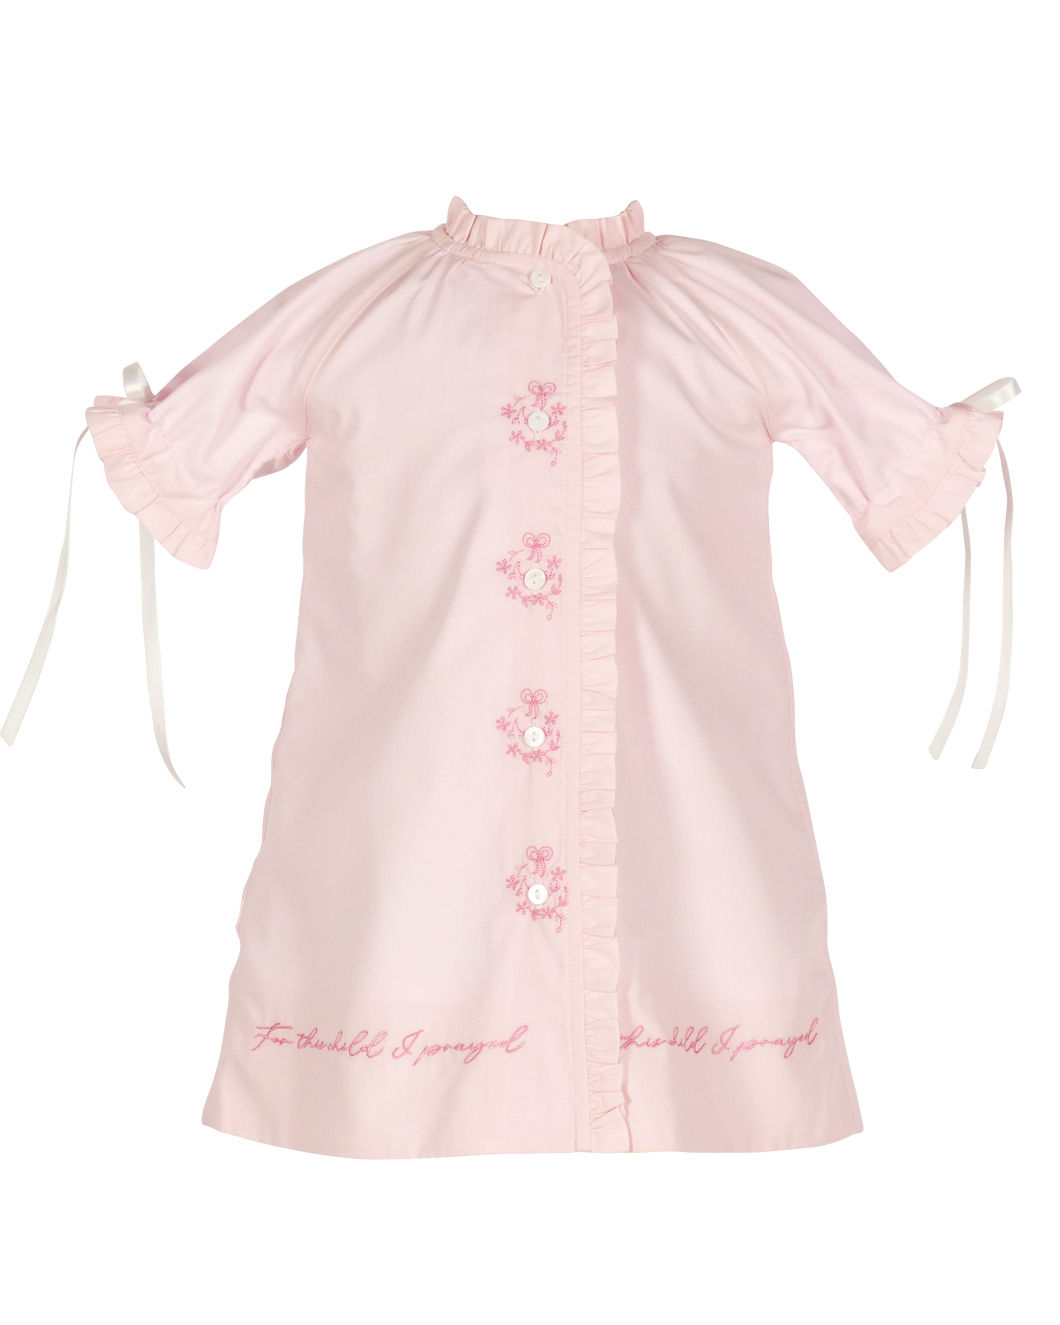 For This Child I Prayed Daygown: Pink